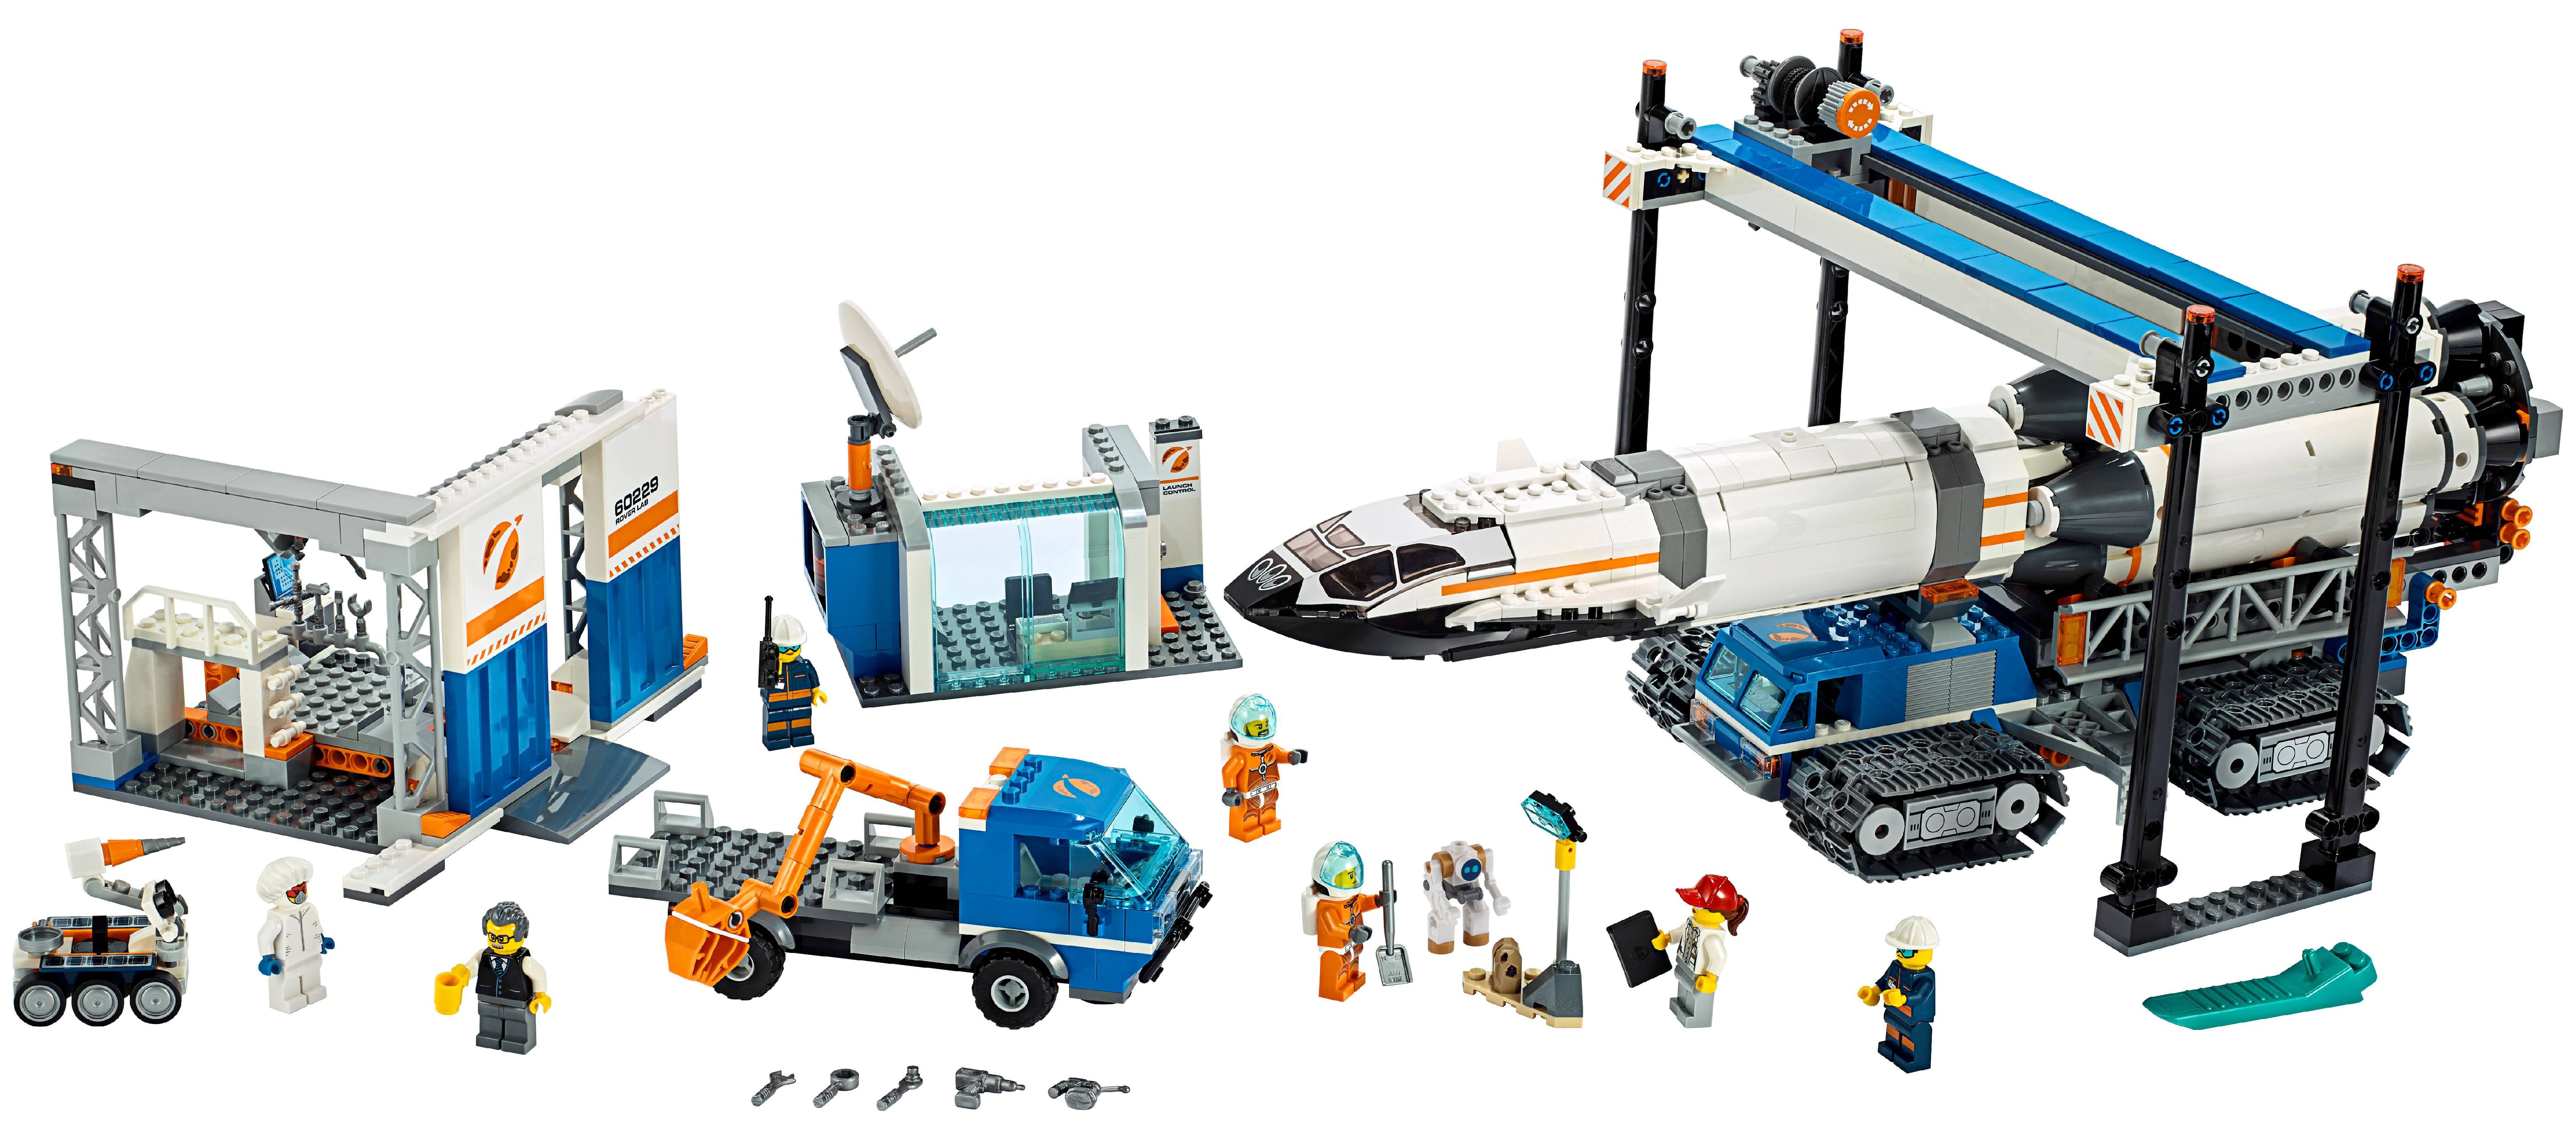 LEGO City Space Rocket Assembly & Transport 60229 Toy Set (1055 Pieces) - image 3 of 8